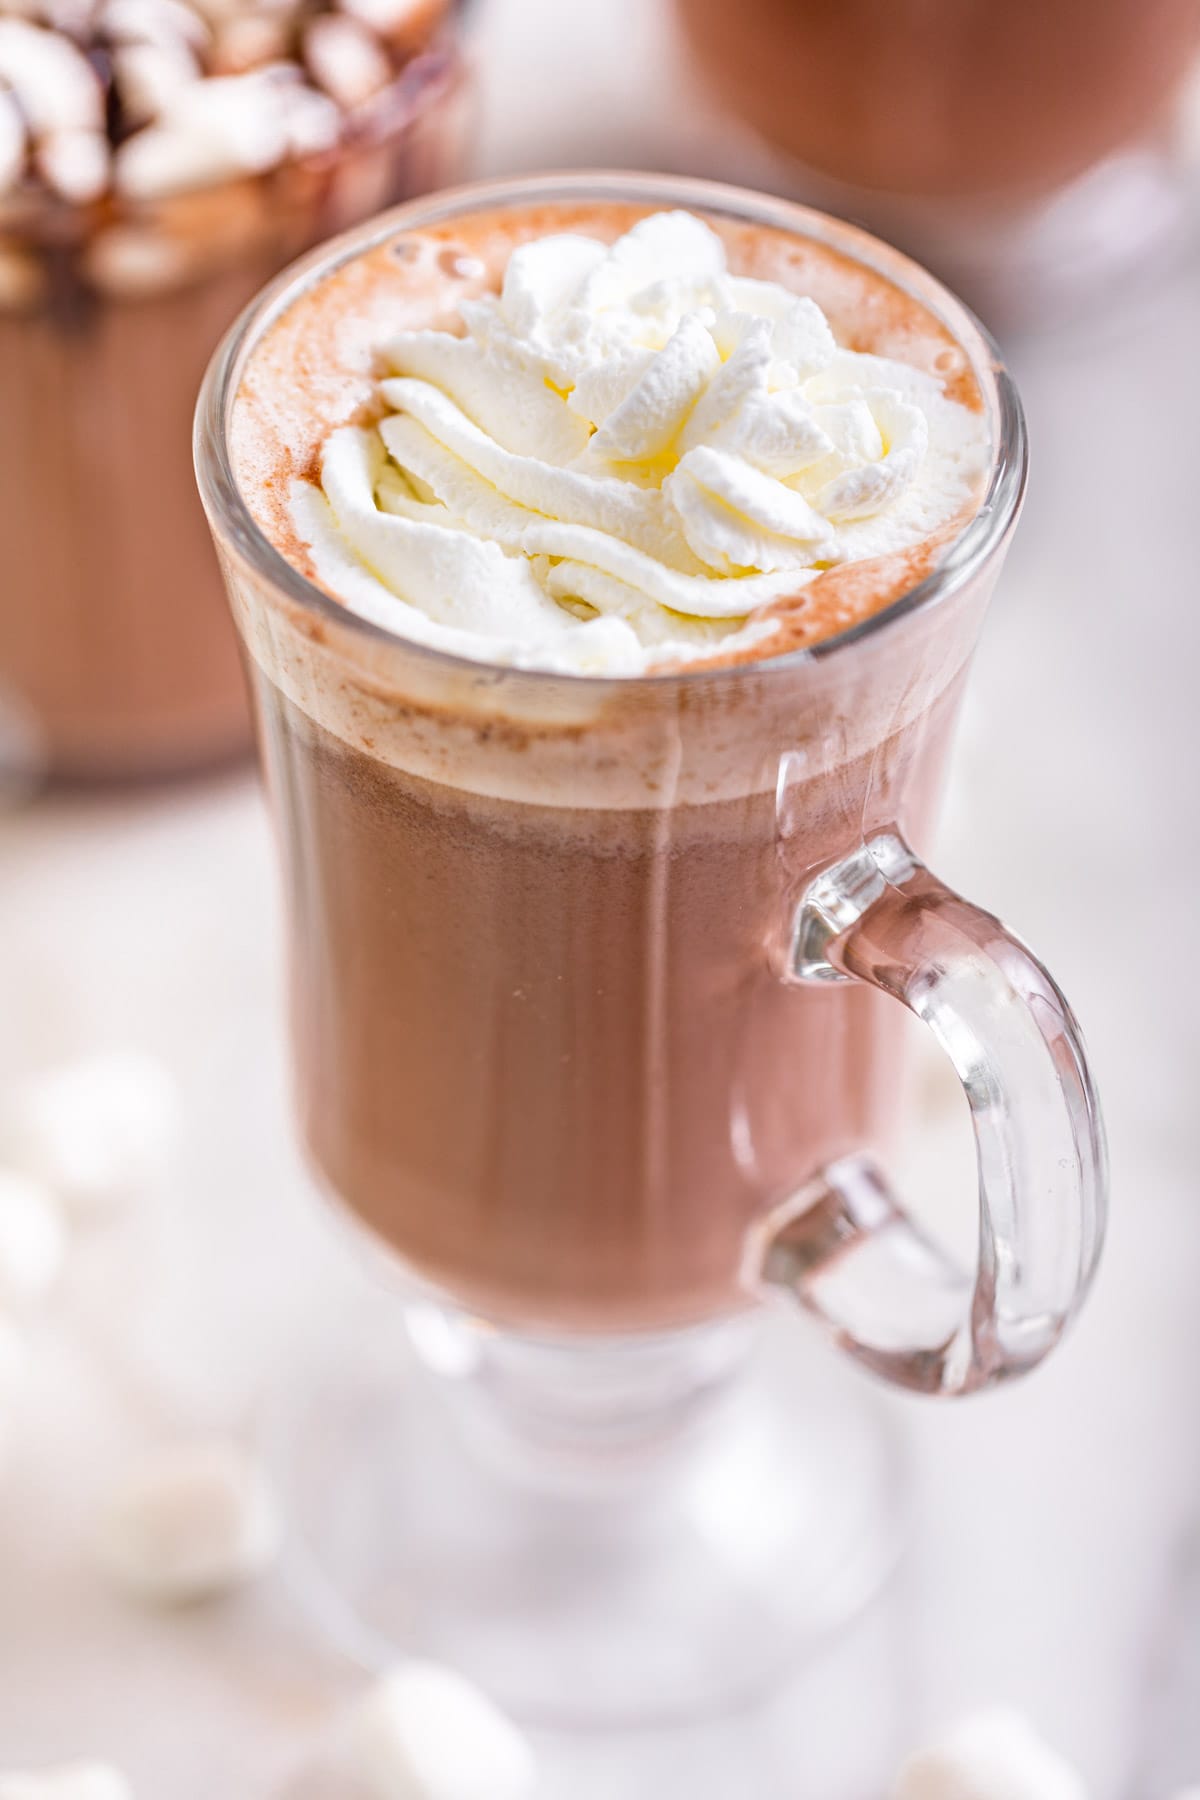 Slow Cooker Hot Chocolate in mug with whipped cream